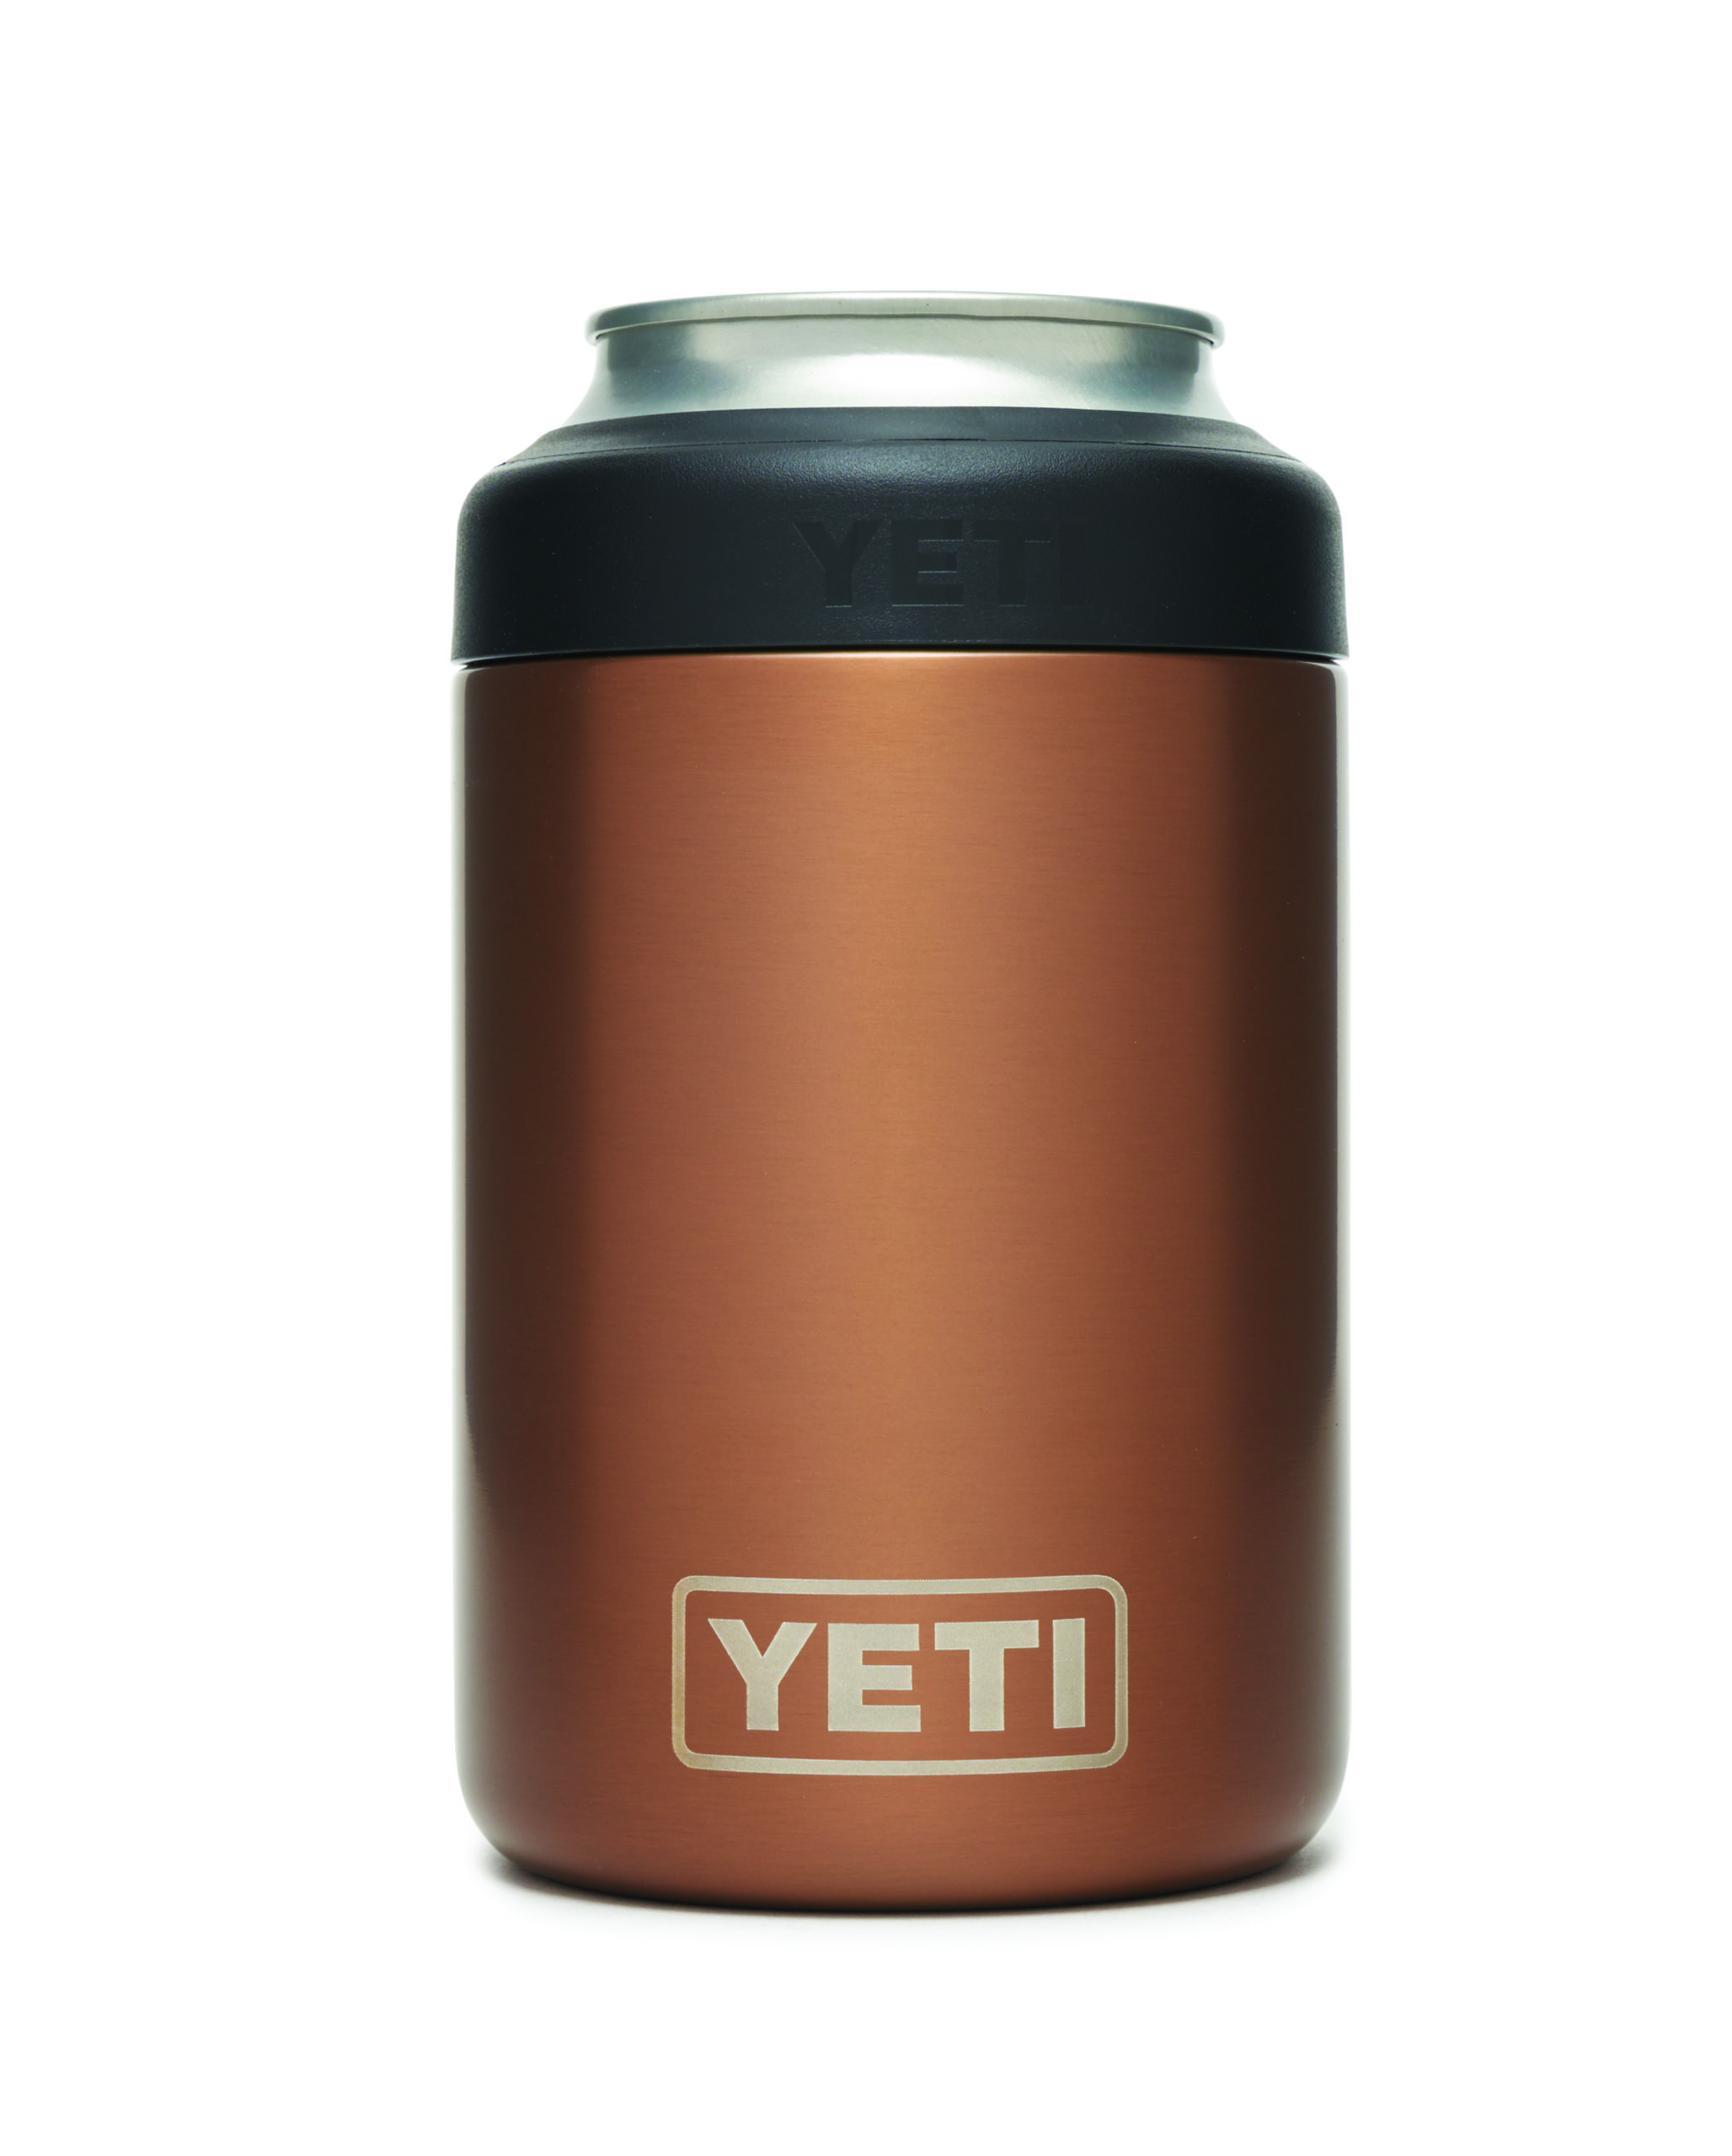 New Yeti Colors 2020 and New Lids! Coral, Pacific Blue and